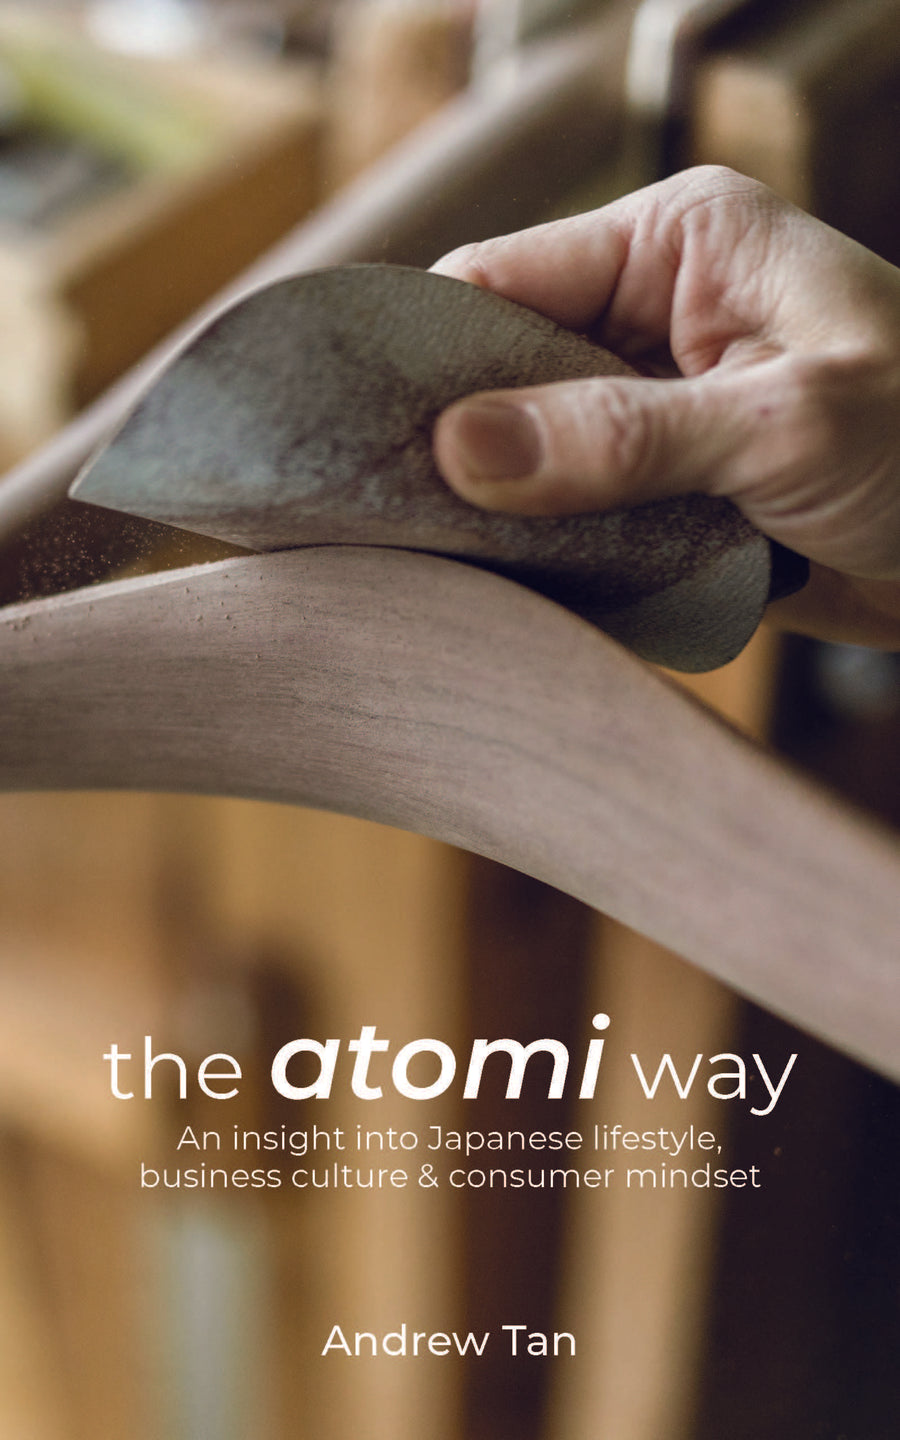 the atomi way / an insider guide to Japanese lifestyle, culture and retail scene